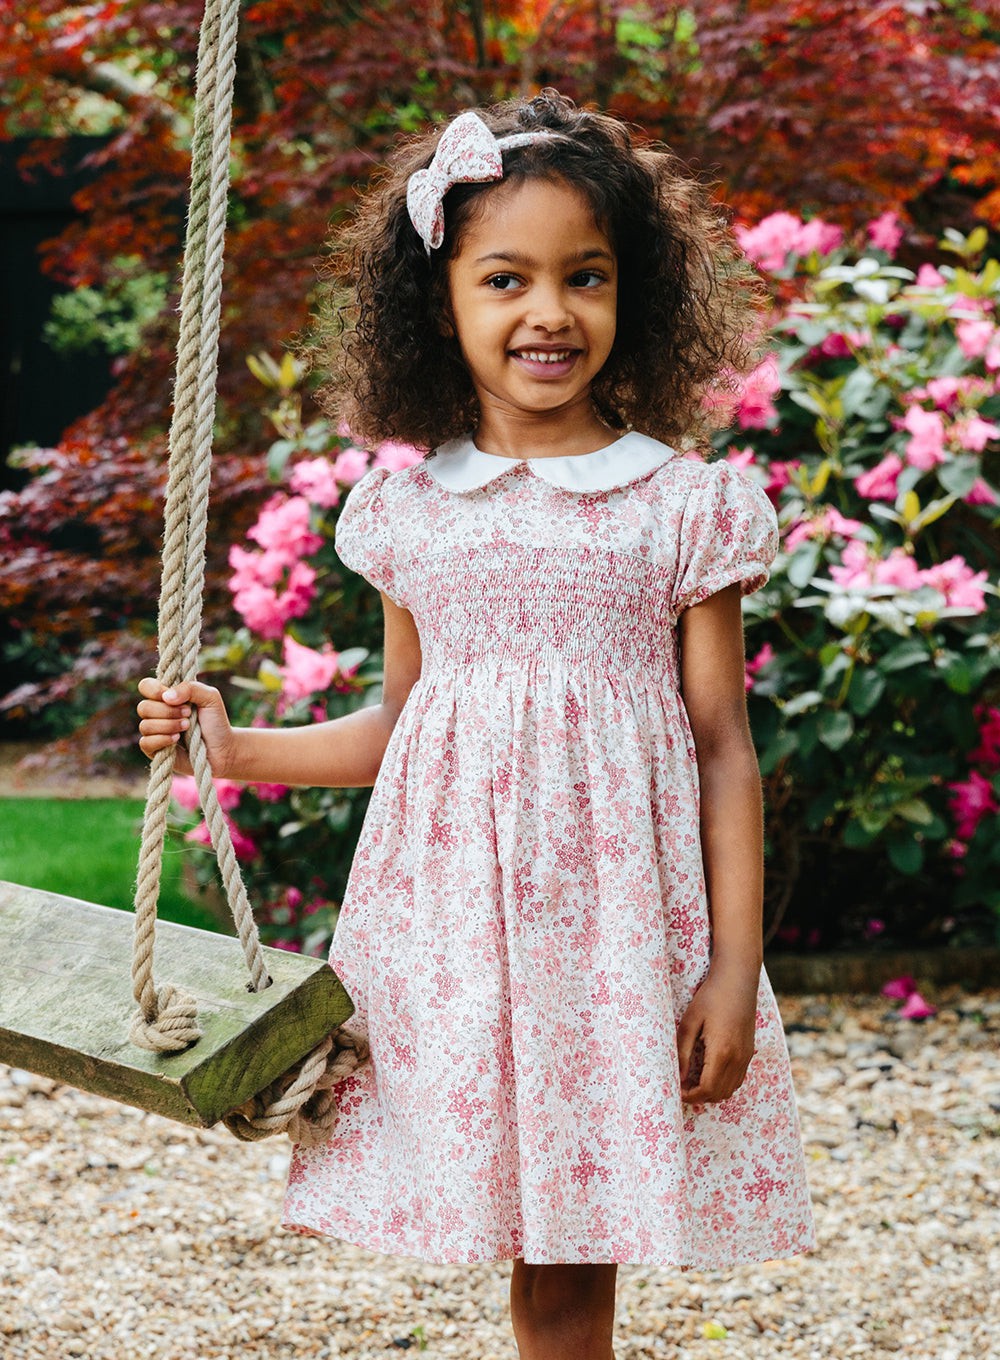 The Trotters Dress Shop | Dresses for Girls and Baby Girls